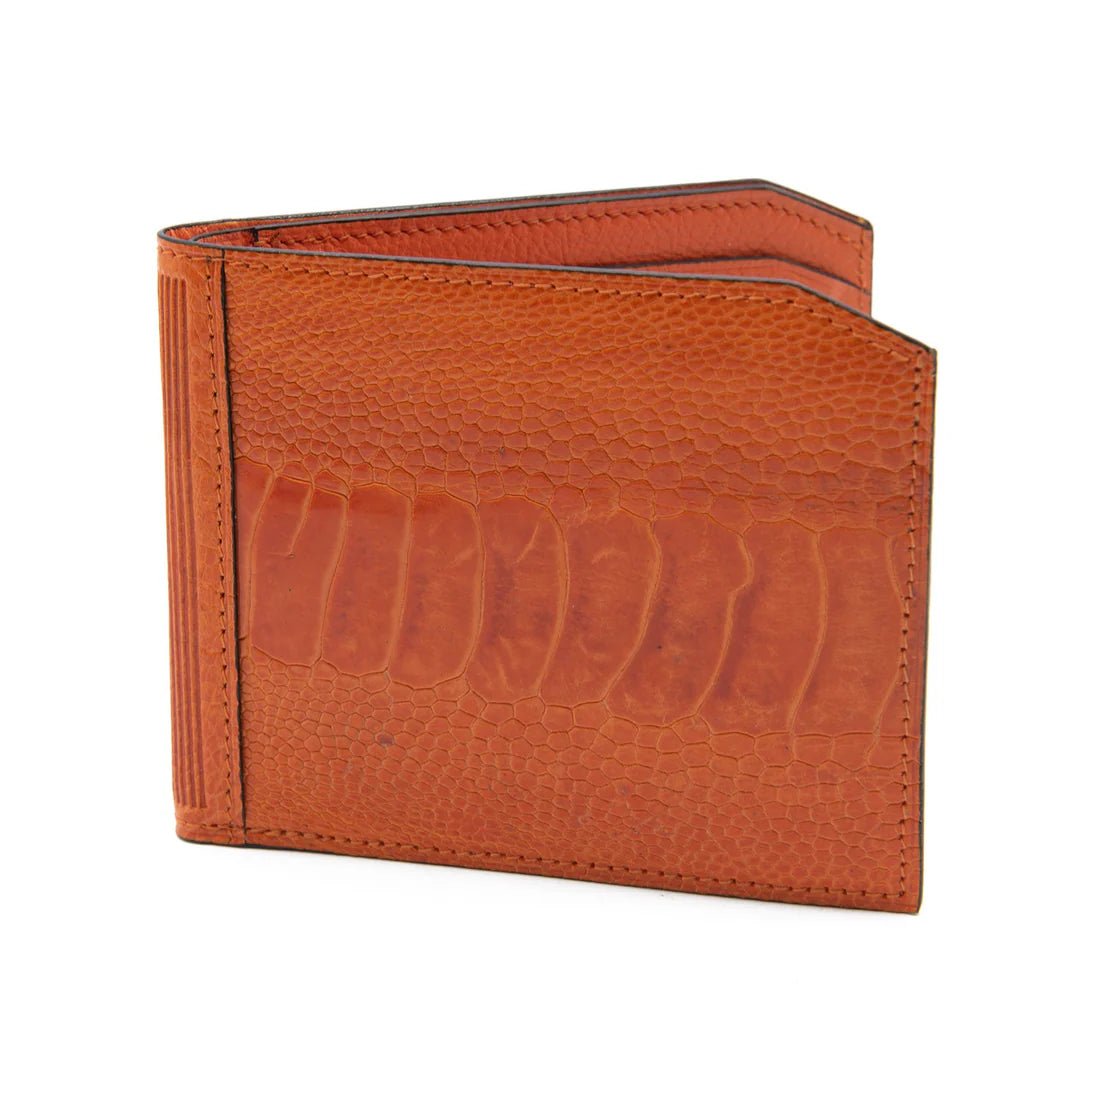 Ostrich Wallets Are a Touch of Exotic Elegance in Everyday Life - Ostrich2Love